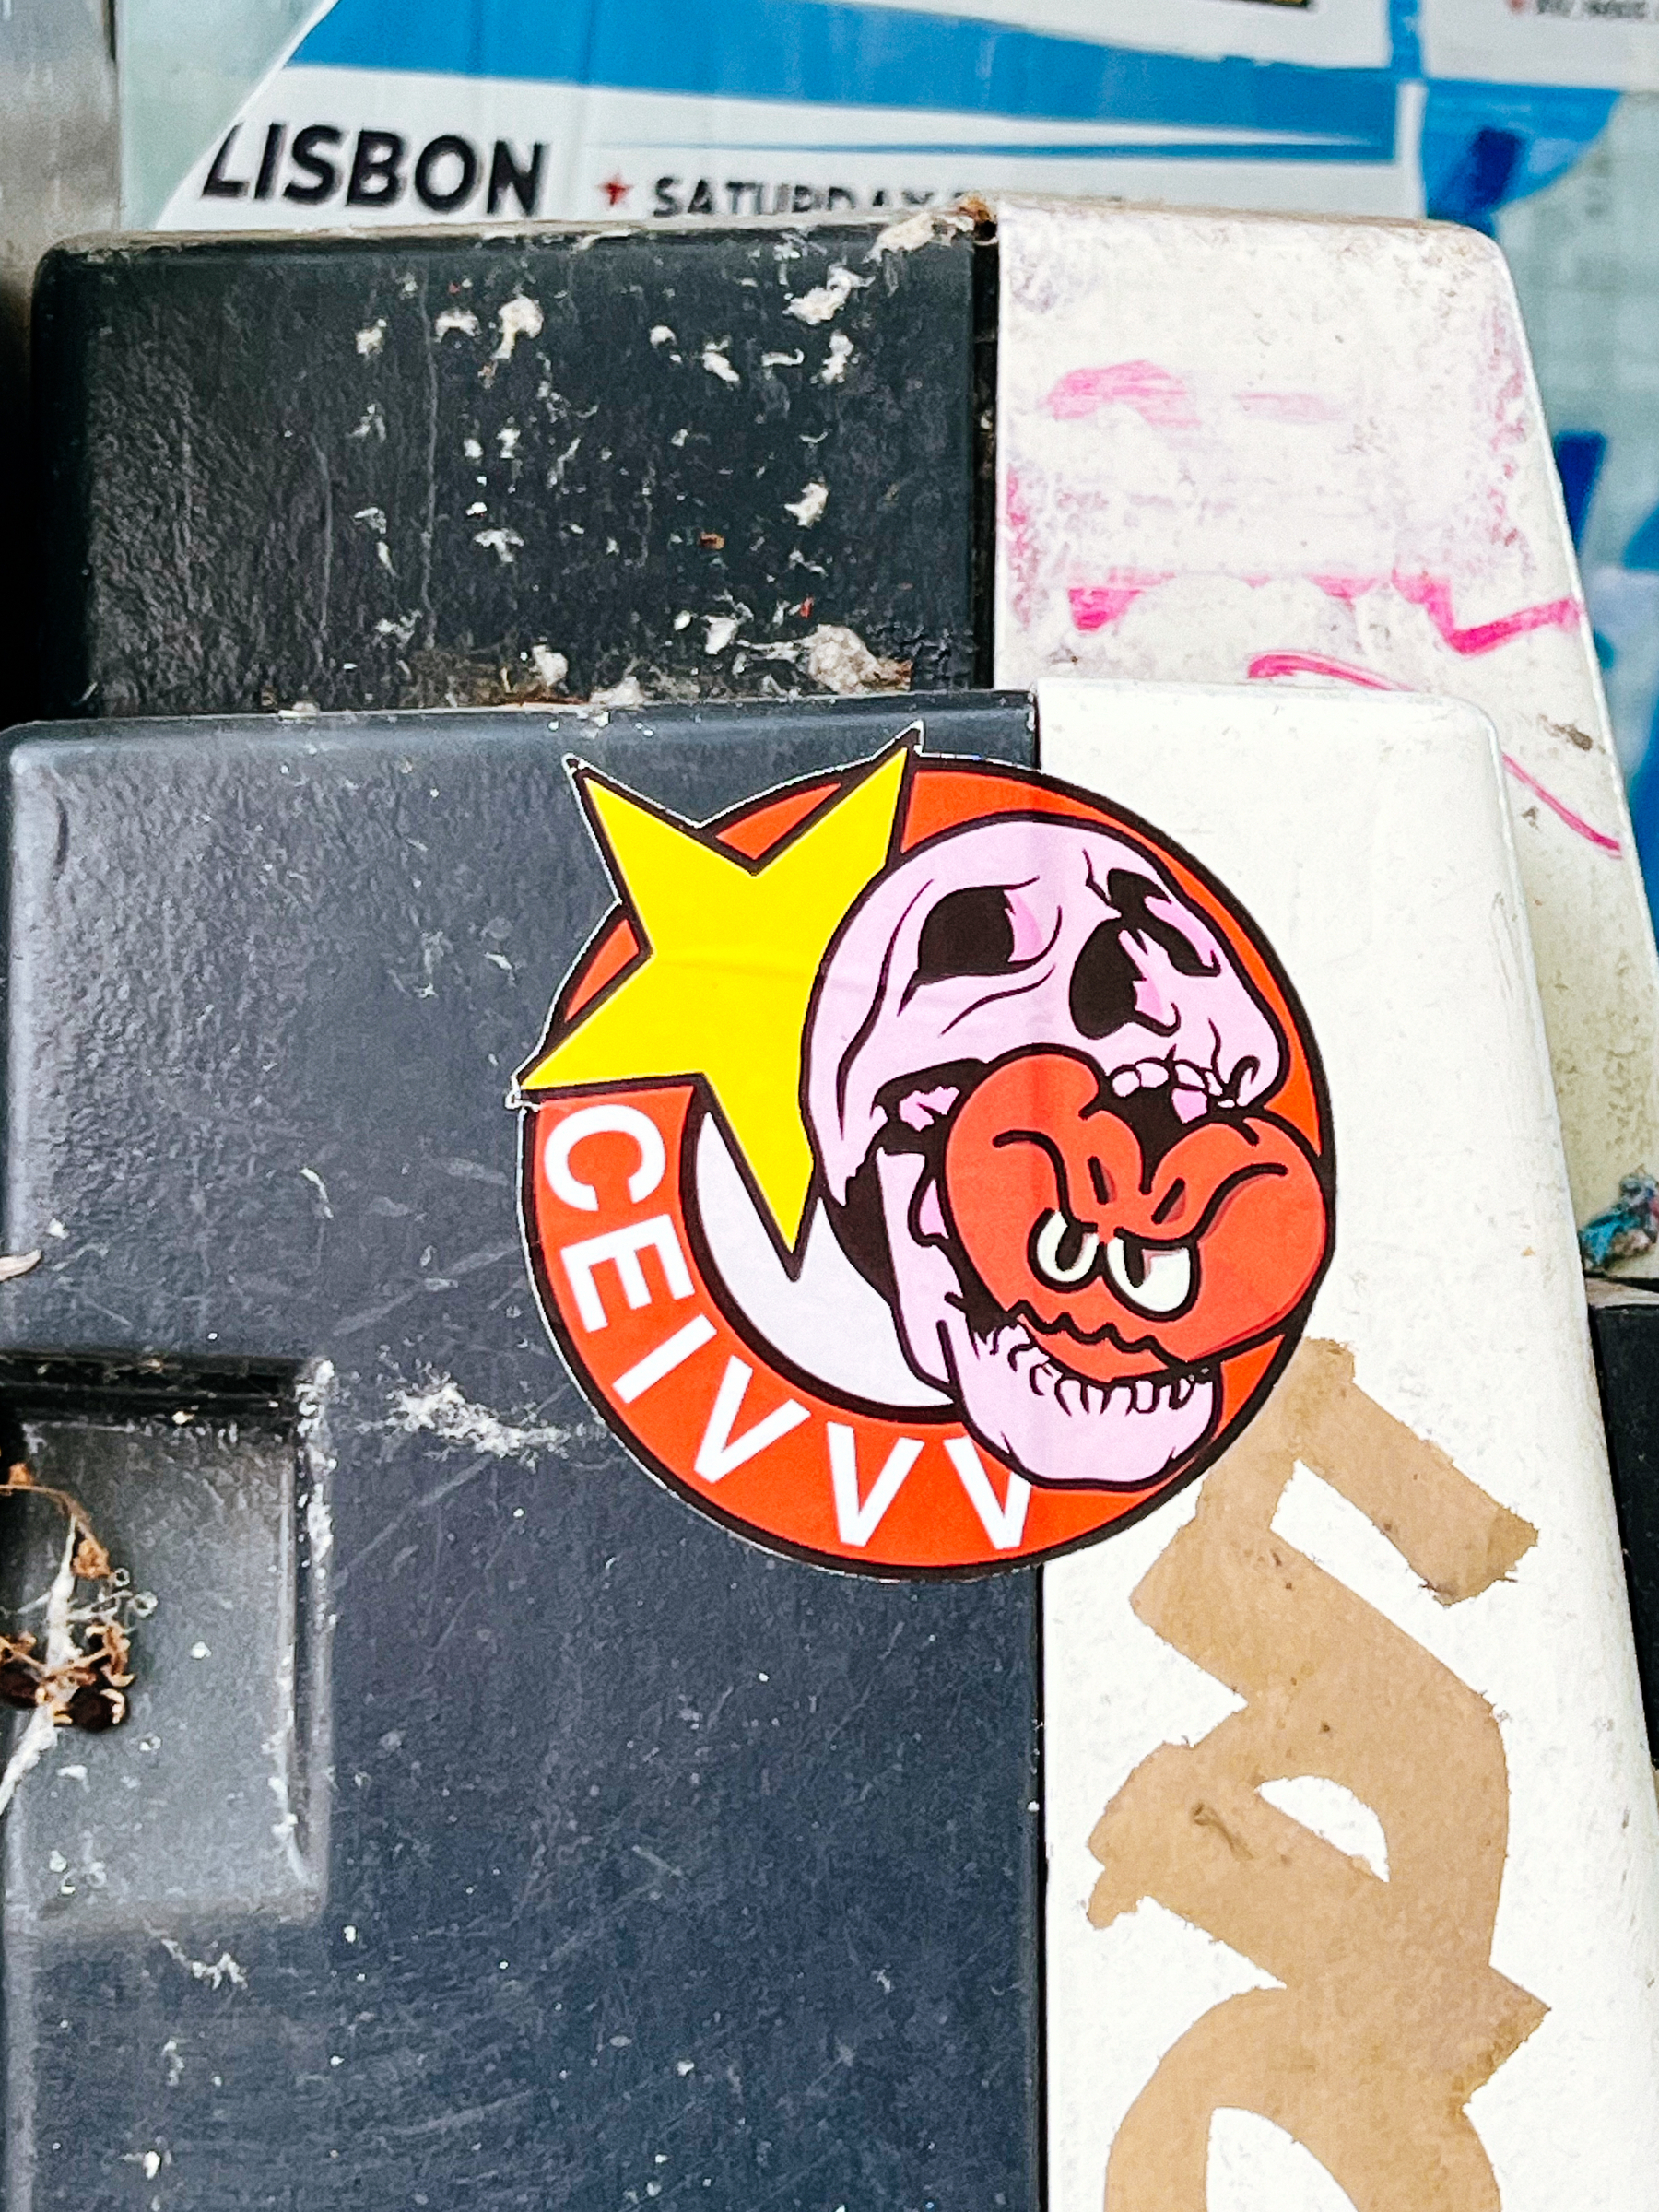 A skull biting a heart, with a star behind them. The characters “CEIVVV”. Sticker. 